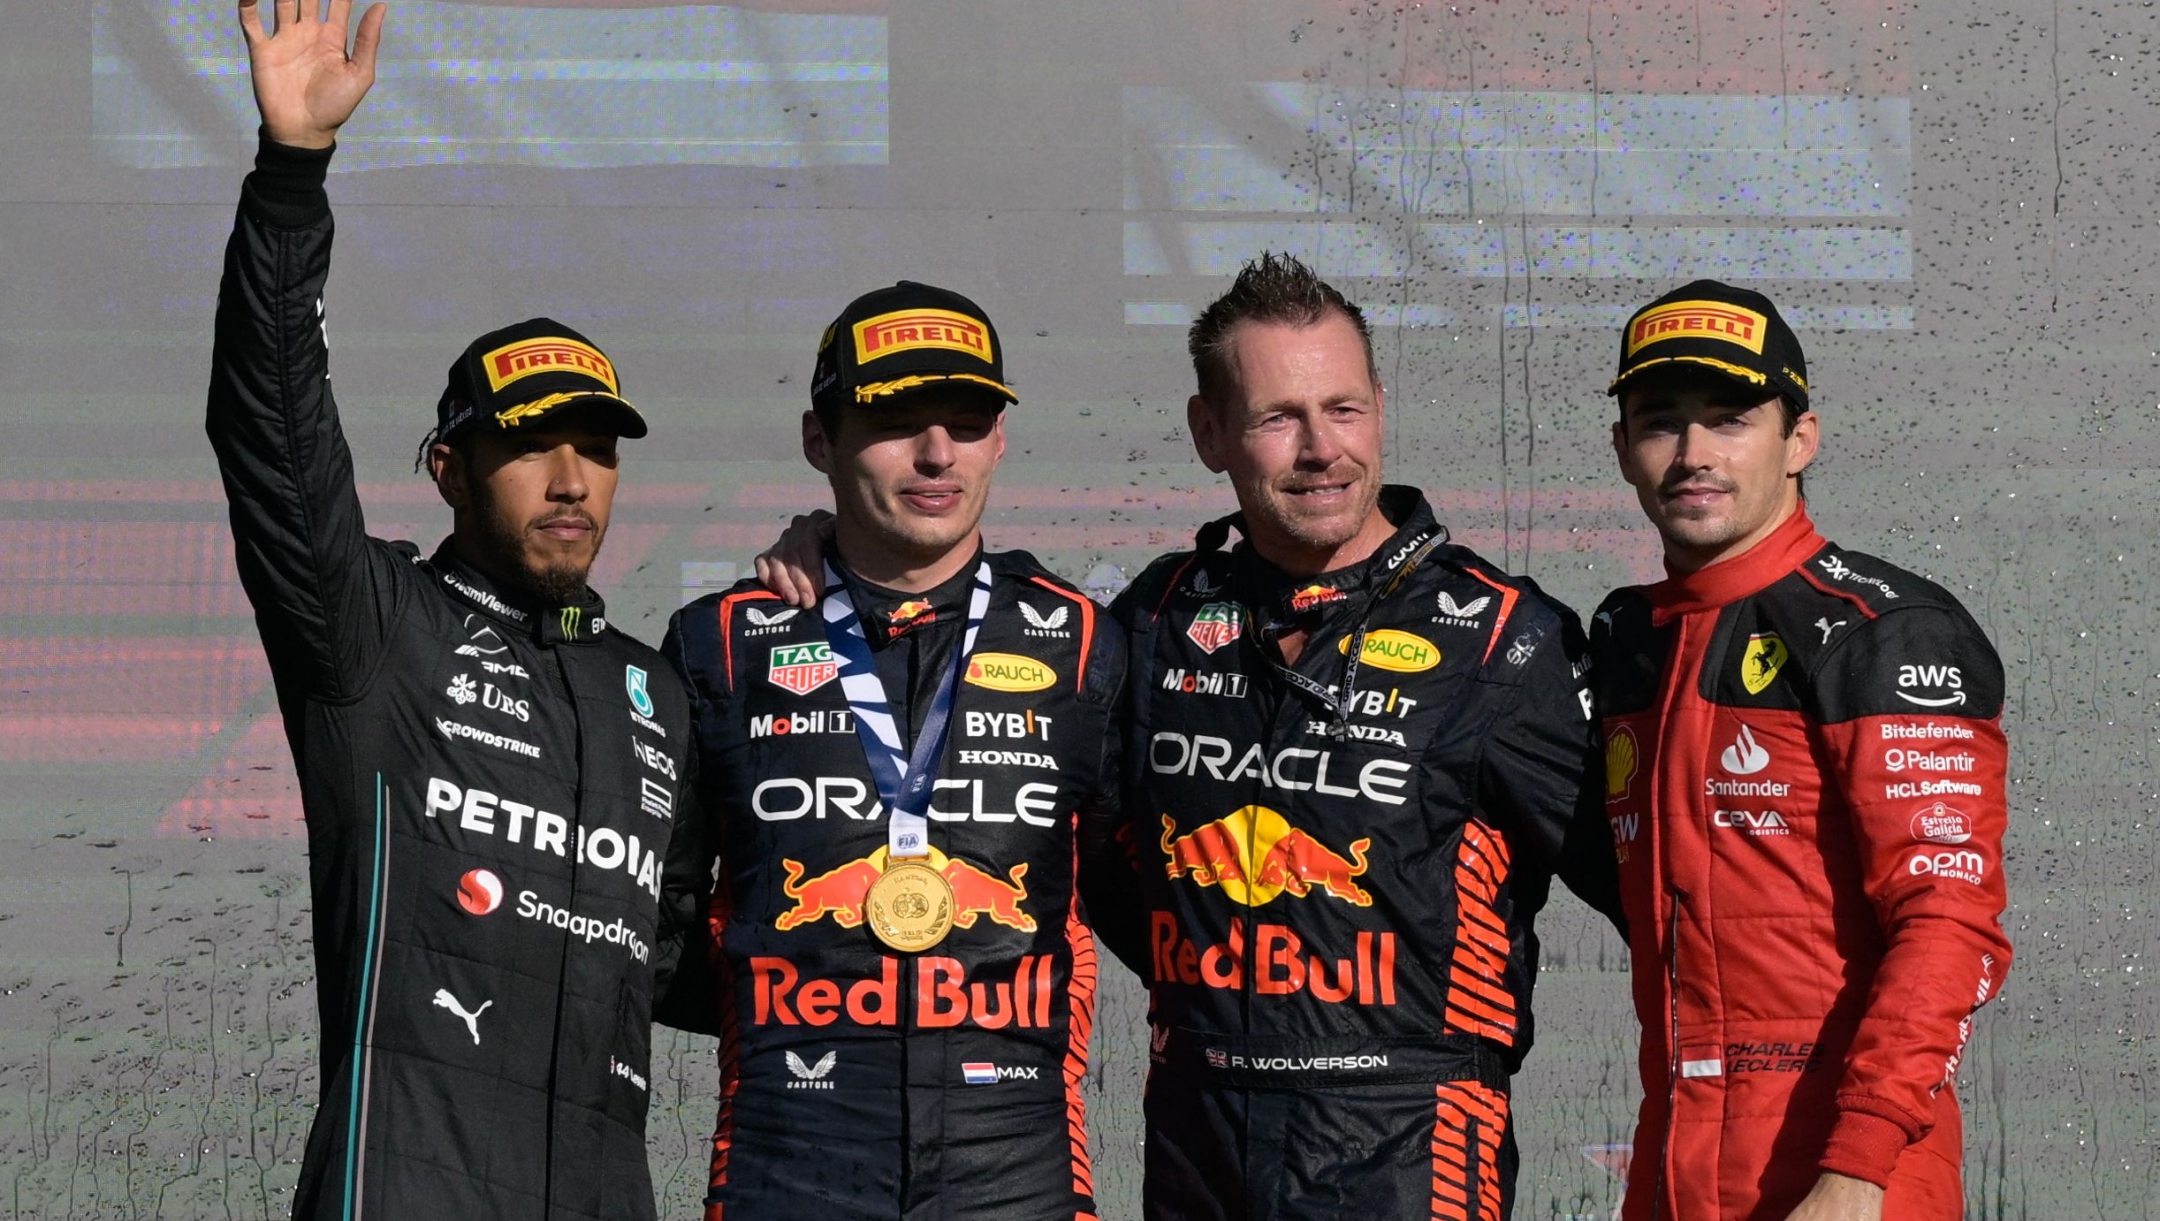 (L to R) Mercedes' British driver Lewis Hamilton, Red Bull Racing's Dutch driver Max Verstappen, Red Bull Racing's British team member Richard Wholverson, and Ferrari's Monegasque driver Charles Leclerc celebrate on the podium after the Formula One Mexico Grand Prix at the Hermanos Rodriguez racetrack in Mexico City on October 29, 2023. Verstappen won the race, Hamilton finished second while Leclerc placed third. (Photo by Alfredo ESTRELLA / AFP)